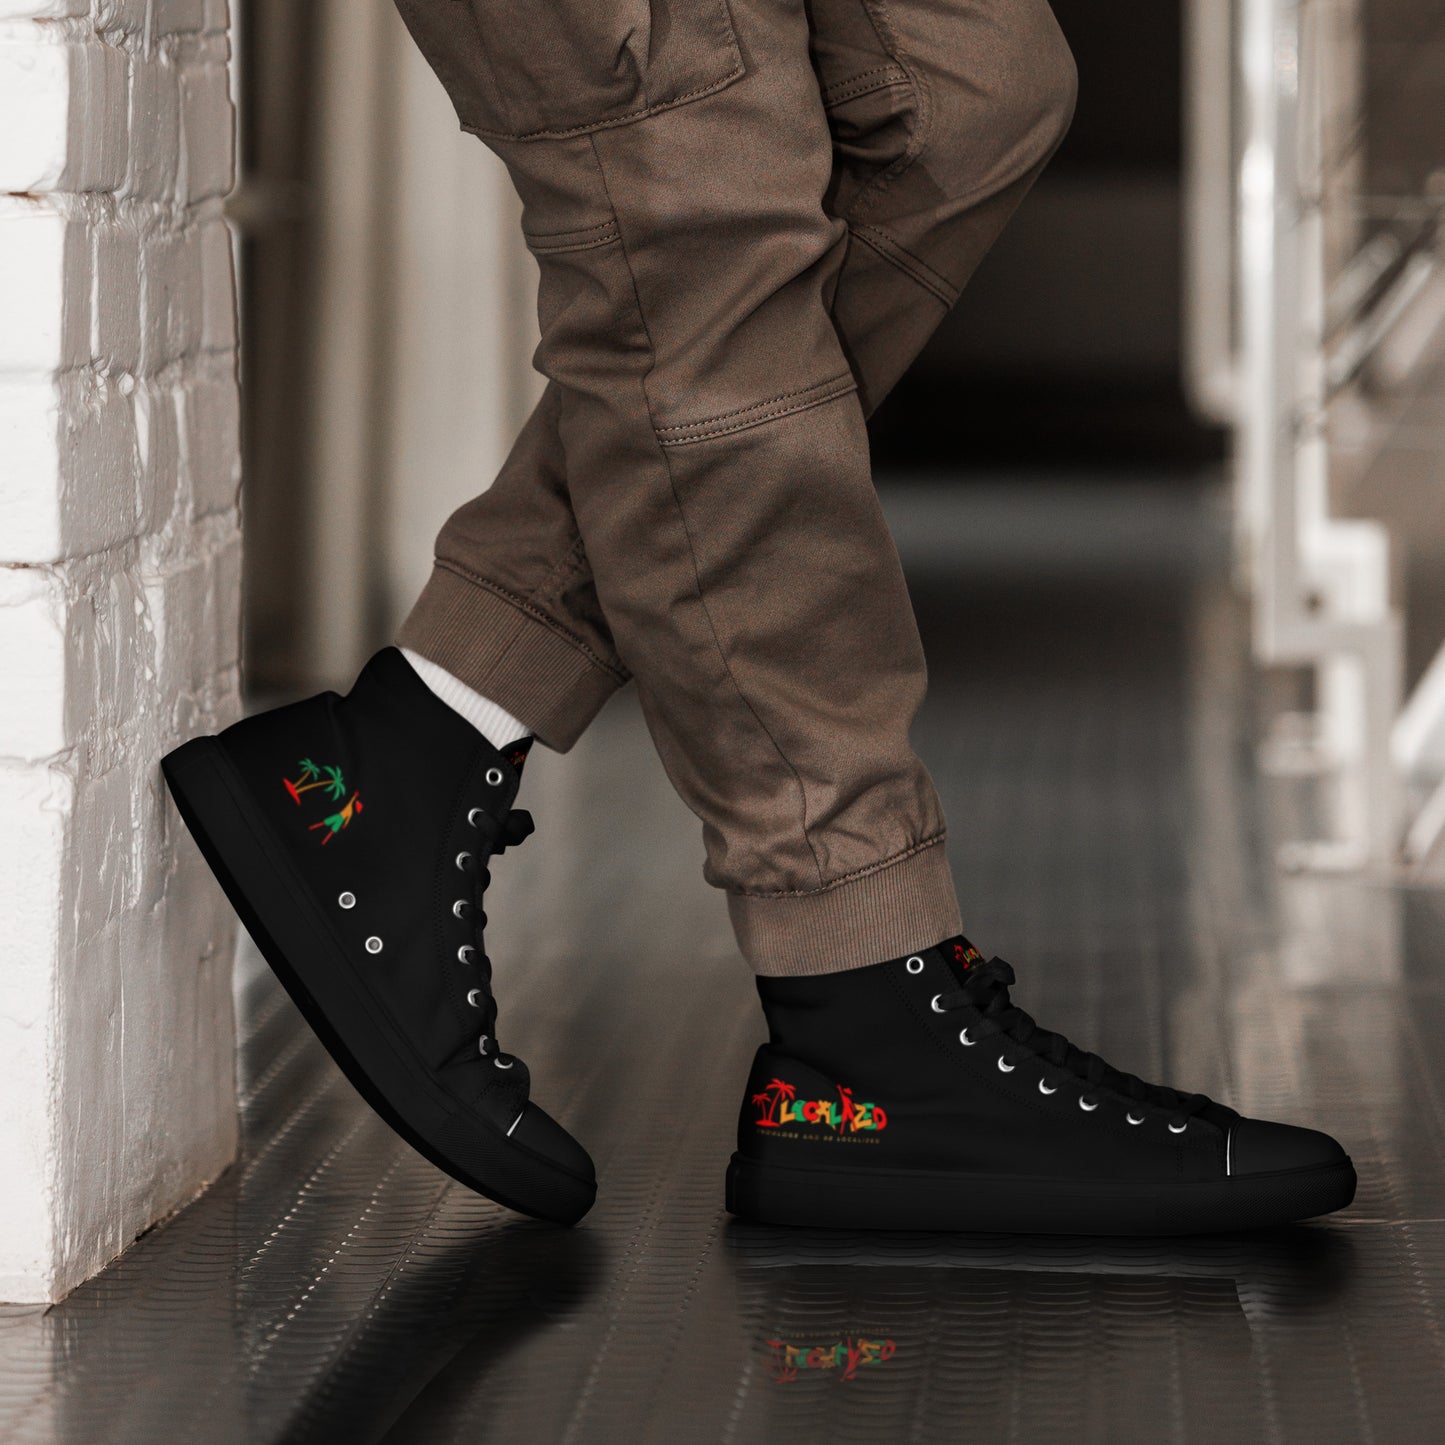 Black V.Localized (Ice/Gold/Green) Men’s high top canvas shoes